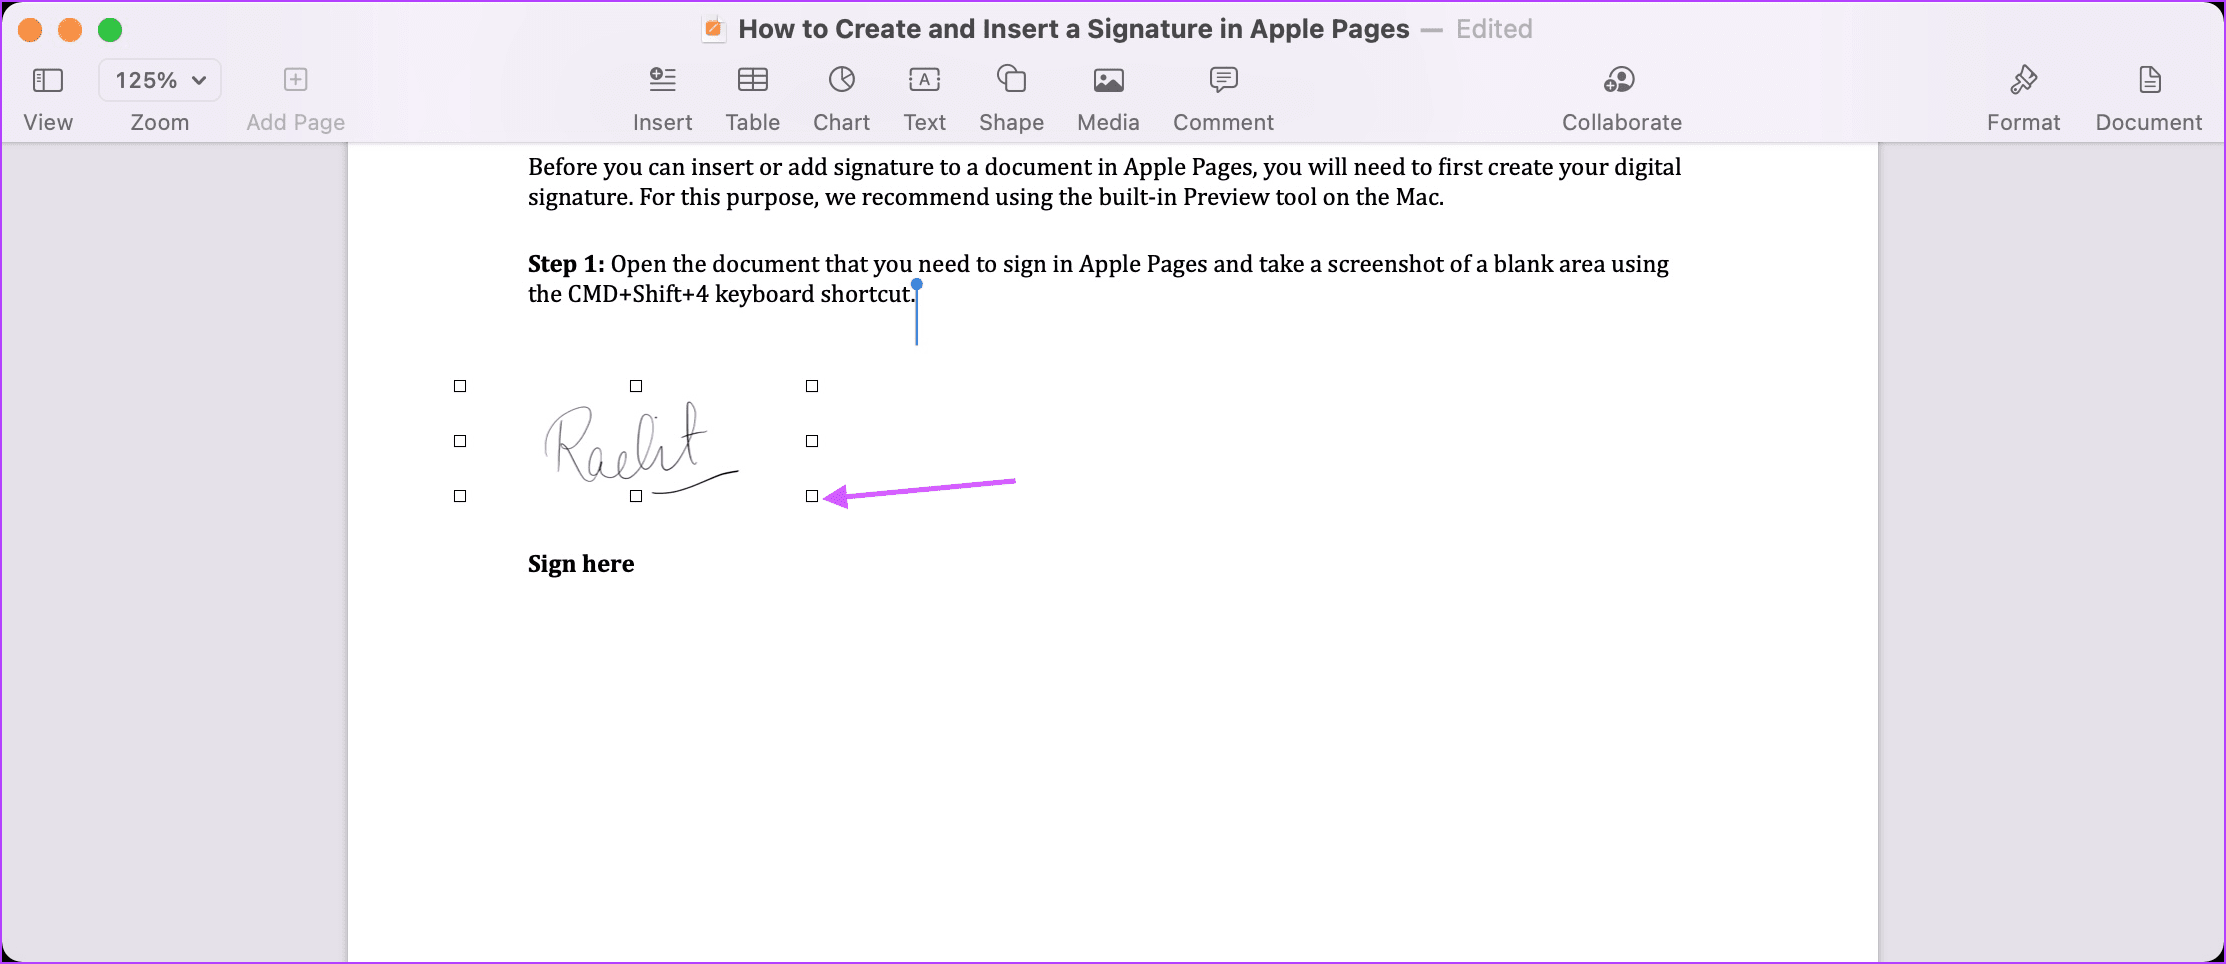 Insert Your Signature in Apple 3 Pages